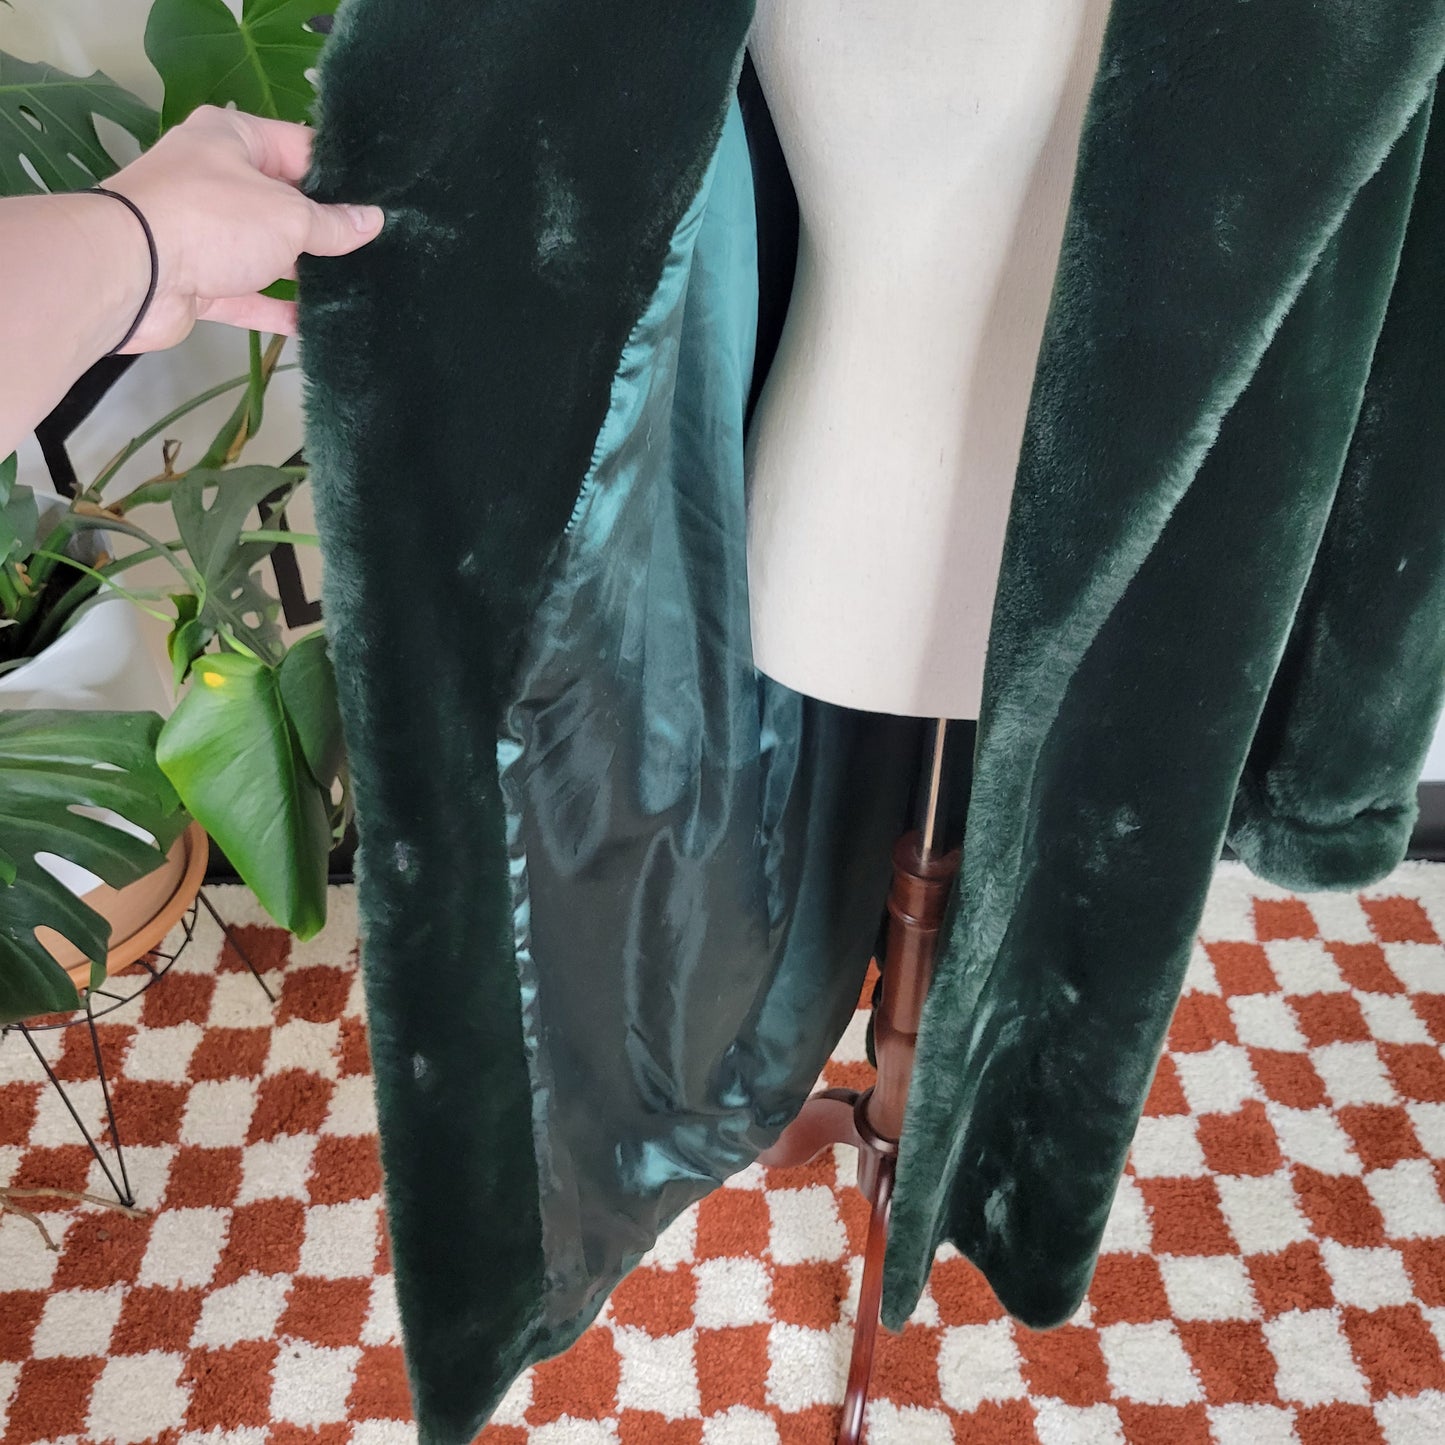 Jean Philippe Ricifriar Made in France Vintage 80s Green Faux Fur Coat - Large